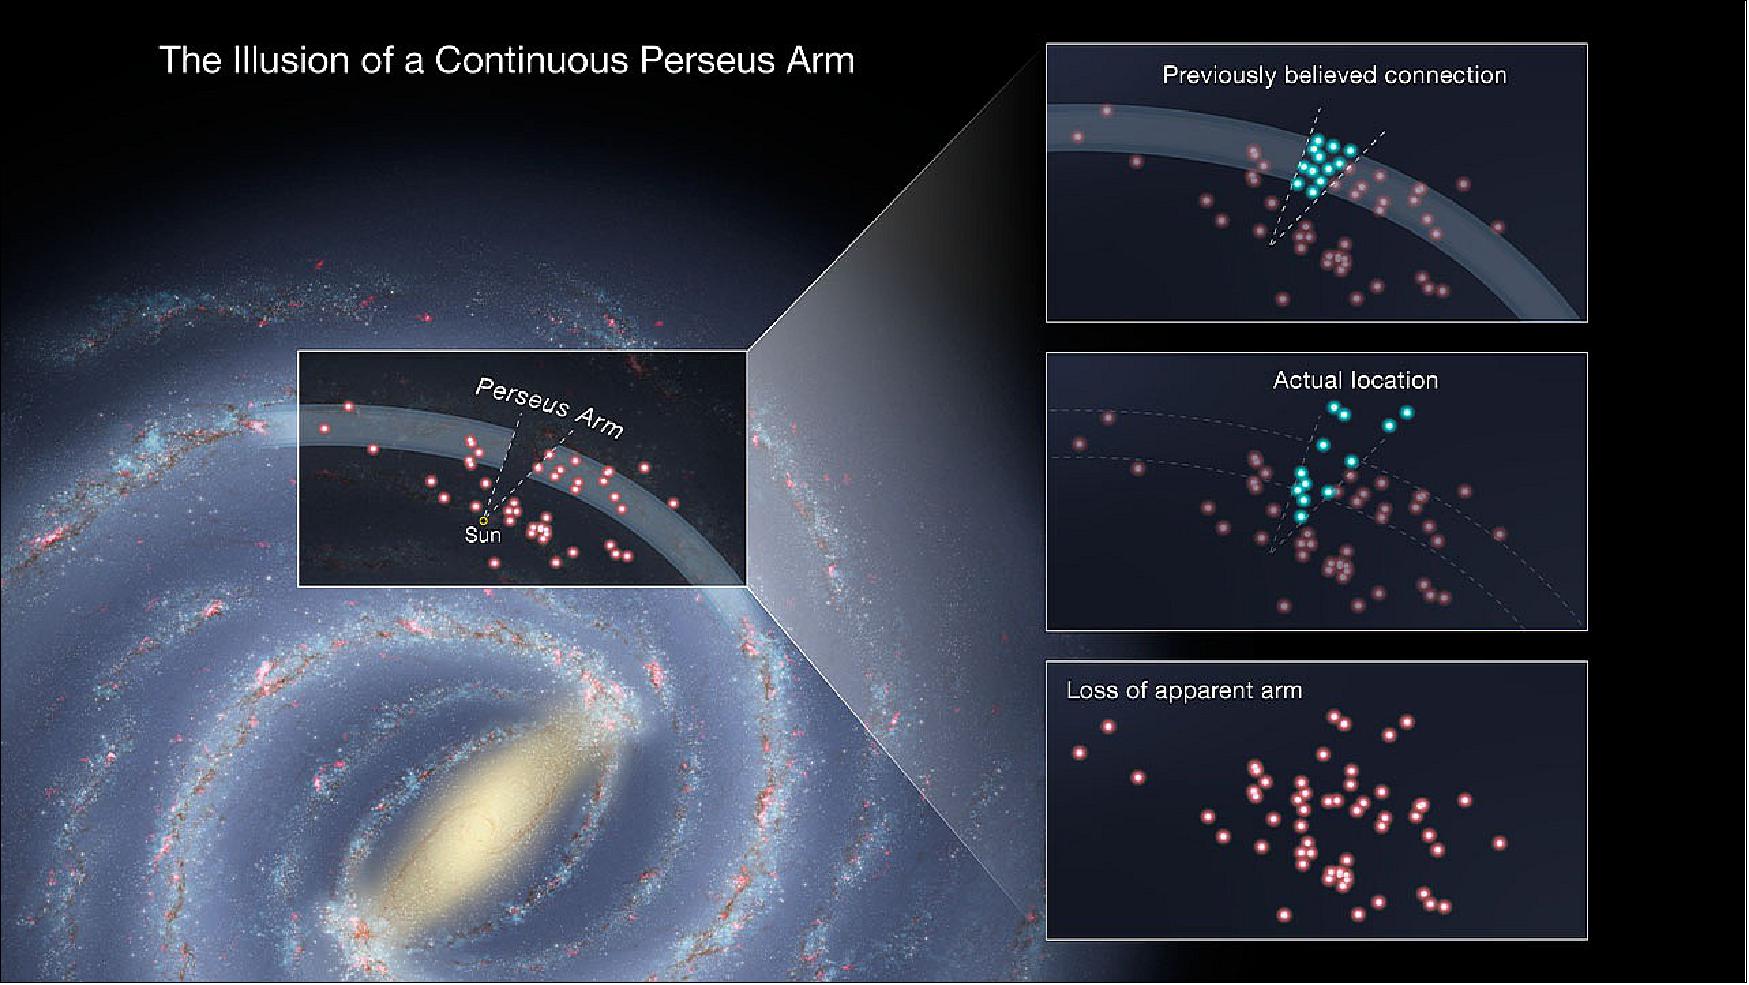 Figure 1: The illusion of a continuous Perseus Arm. In a map of the Milky Way, the neighboring spiral arm just beyond the Sun is known as the Perseus arm. Astronomers created this map by measuring the locations of natural radio sources known as masers (pink dots in pullouts at right) and dust clouds (blue dots). At upper right, a shaded region shows the previously believed shape of the Perseus arm, demarcated by a combination of masers and dust clouds. New measurements (middle right) show that some of these dust clouds are much closer or farther from the Sun than originally thought. As a result, the Perseus arm may be much clumpier and less well-defined (lower right), [Credits: Science: Joshua Peek (STScI); Illustration: Robert L. Hurt (Caltech, IPAC), Leah Hustak (STScI)]